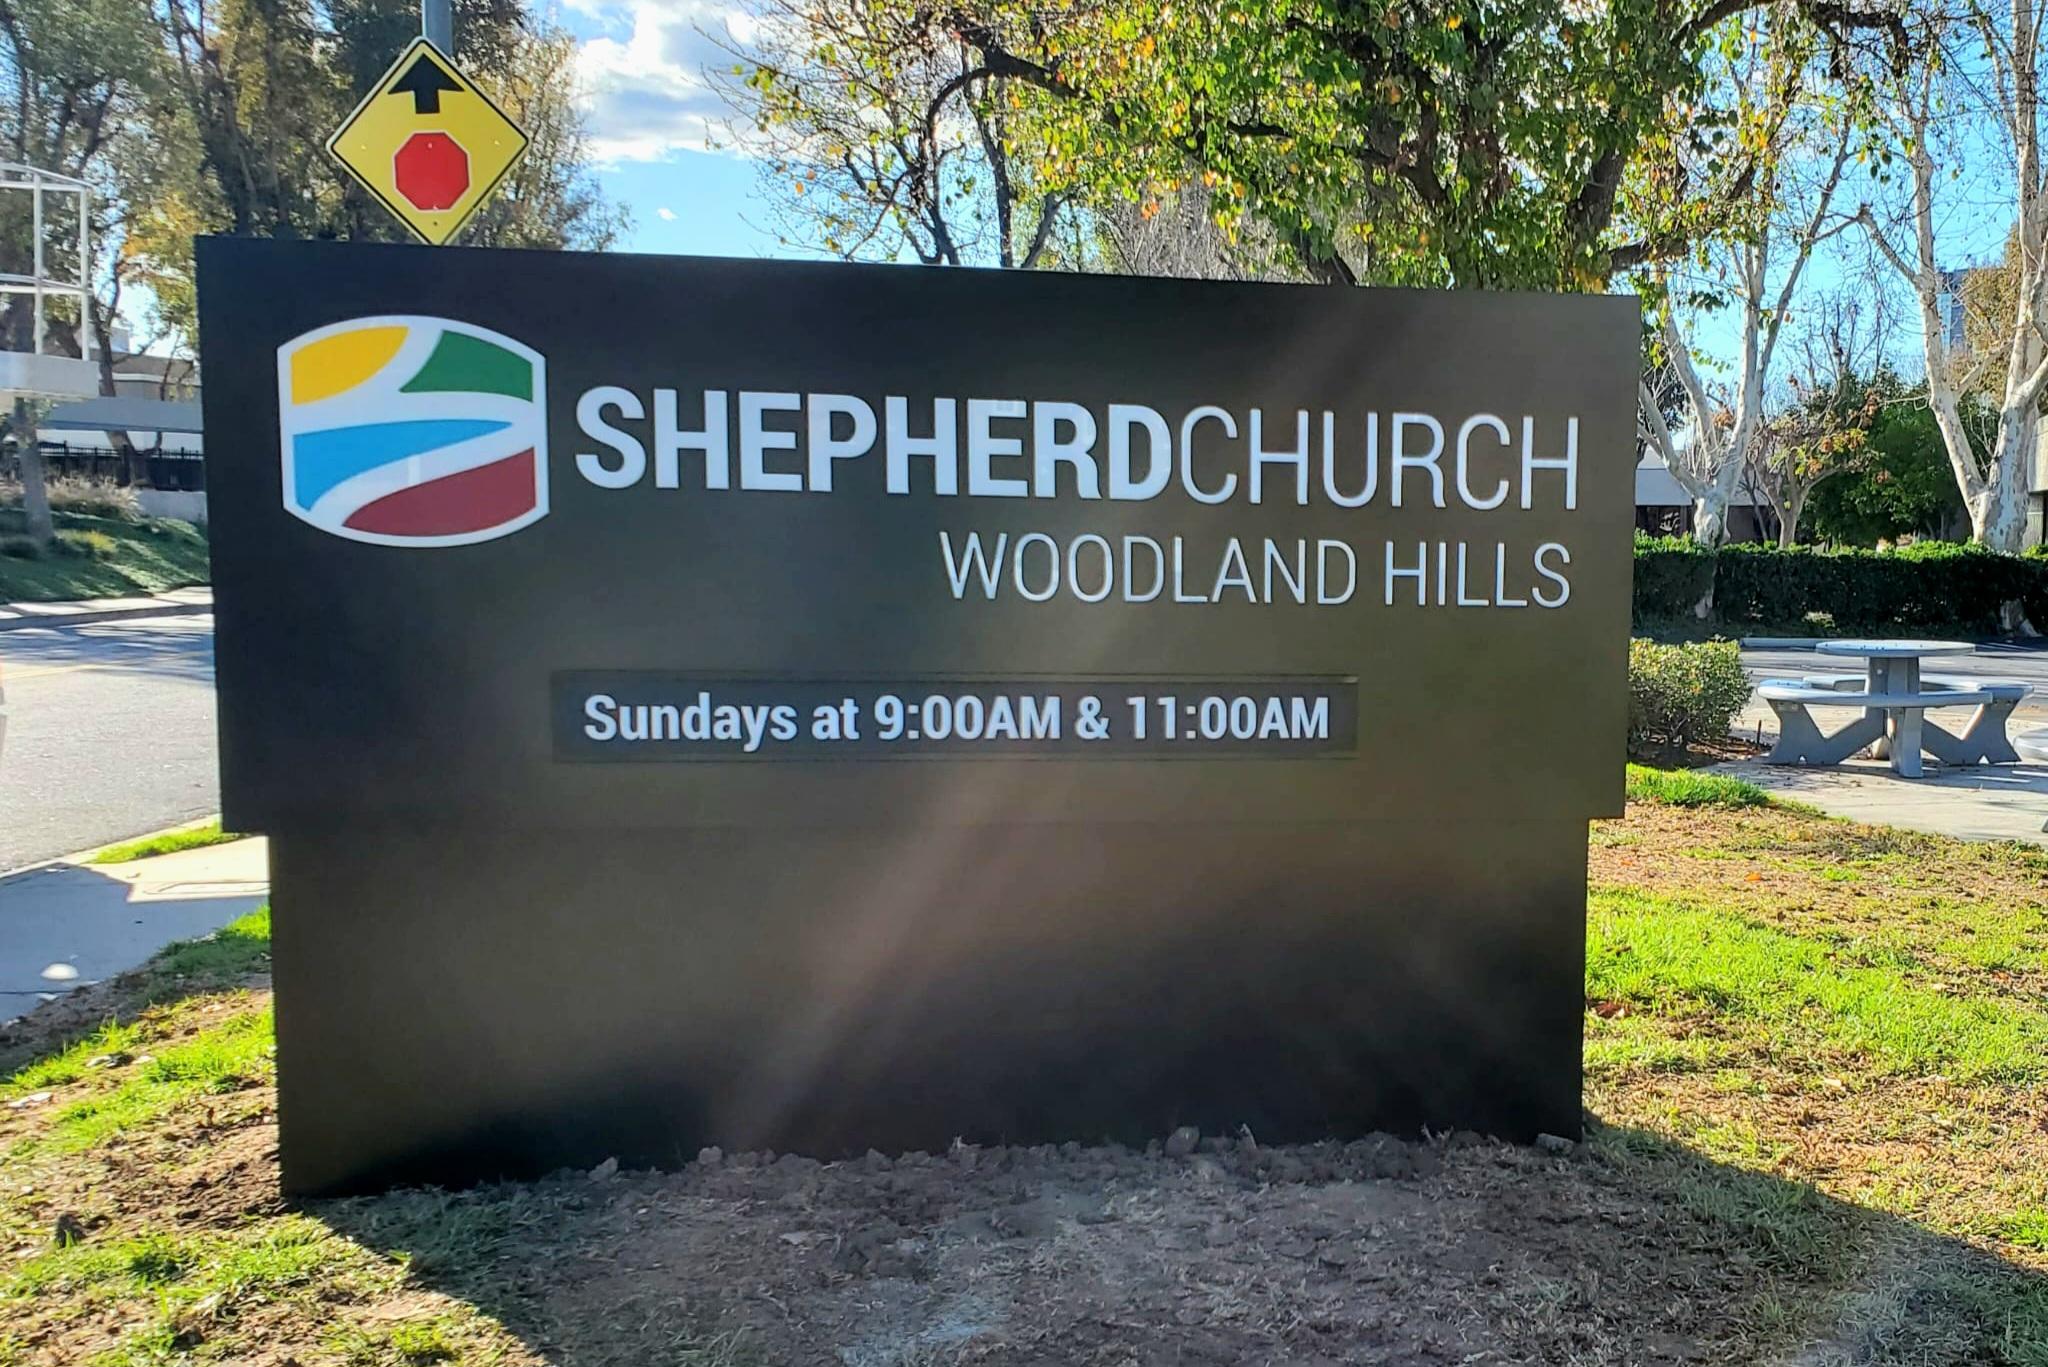 Closeup of the monument sign 1 for Shepherd Church